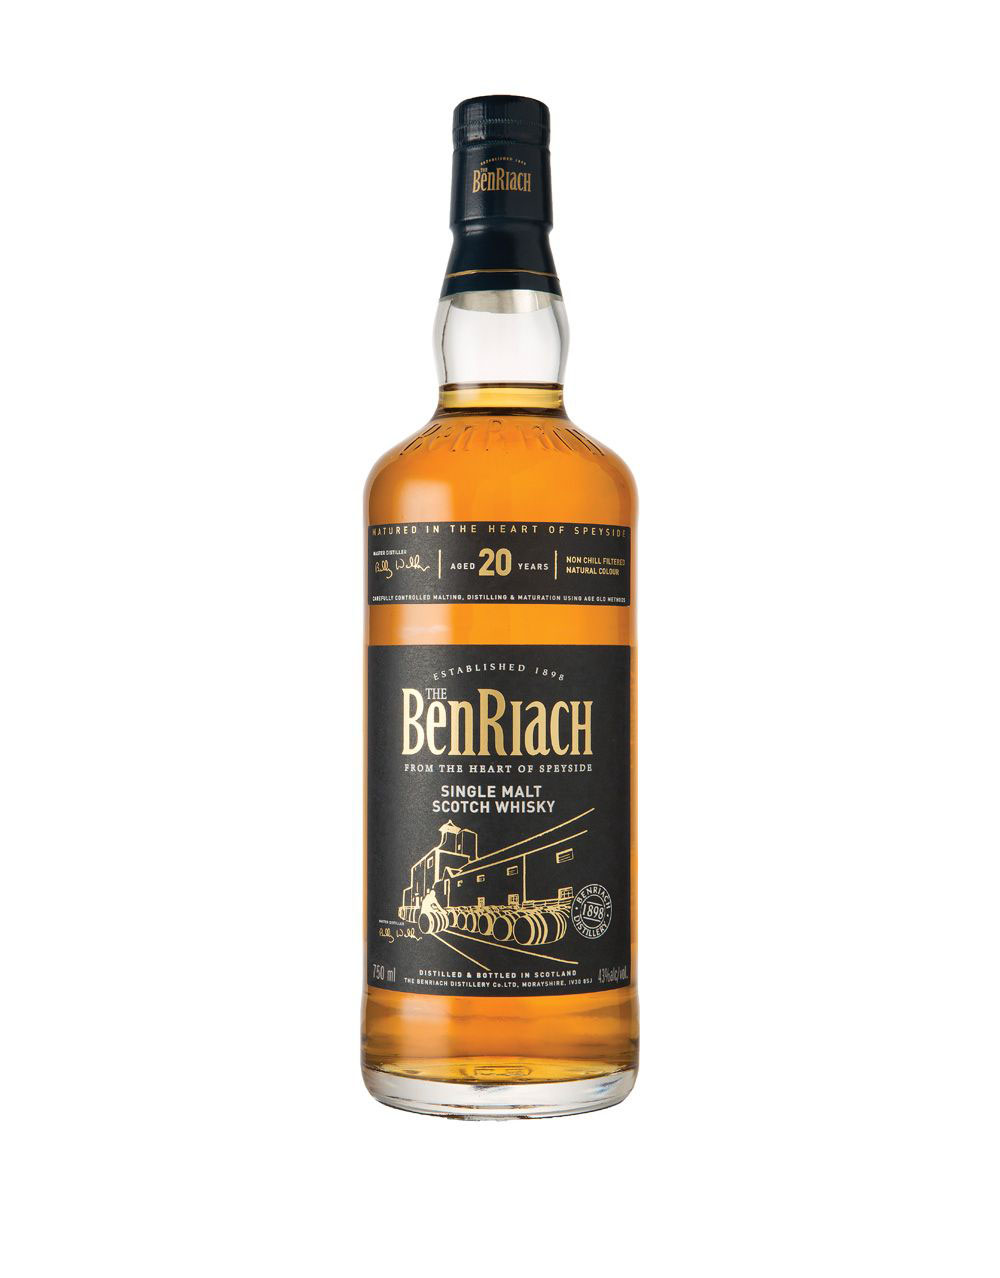 The BenRiach 20 Year Old